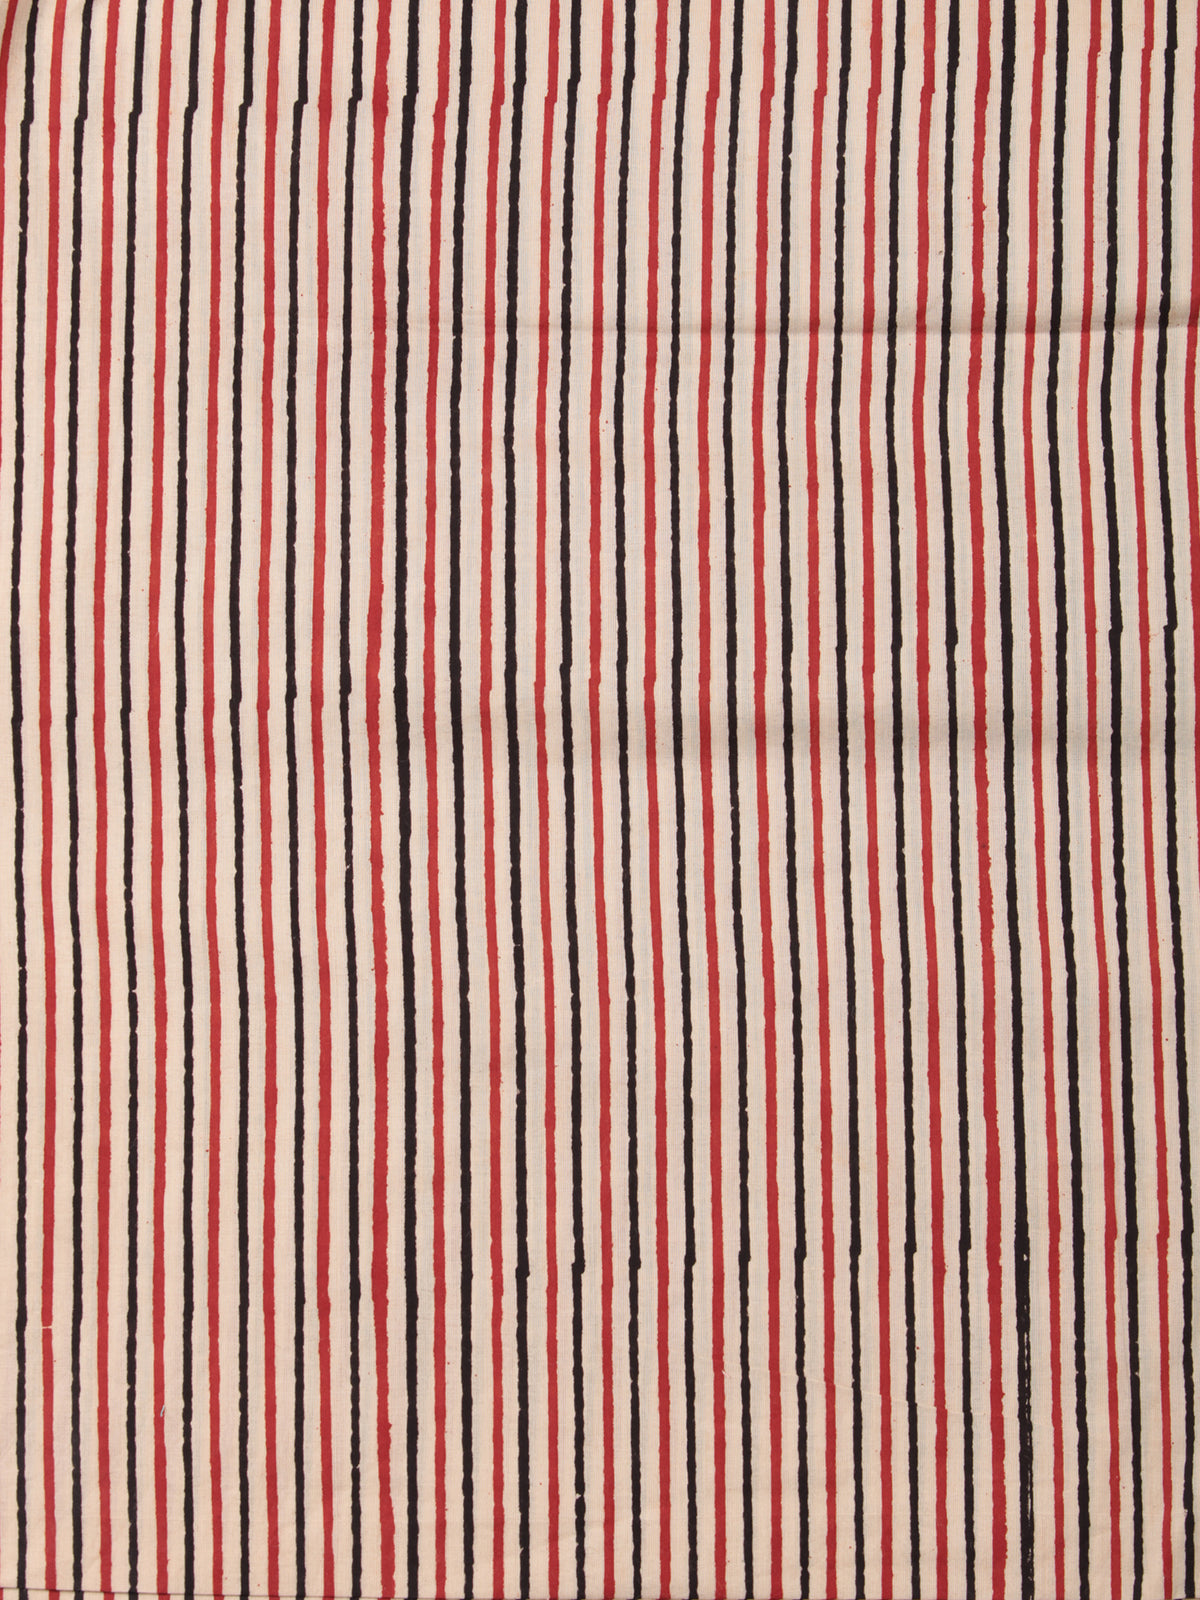 OffWhite Red Black Hand Block Printed Cotton Fabric Per Meter - F001F2448